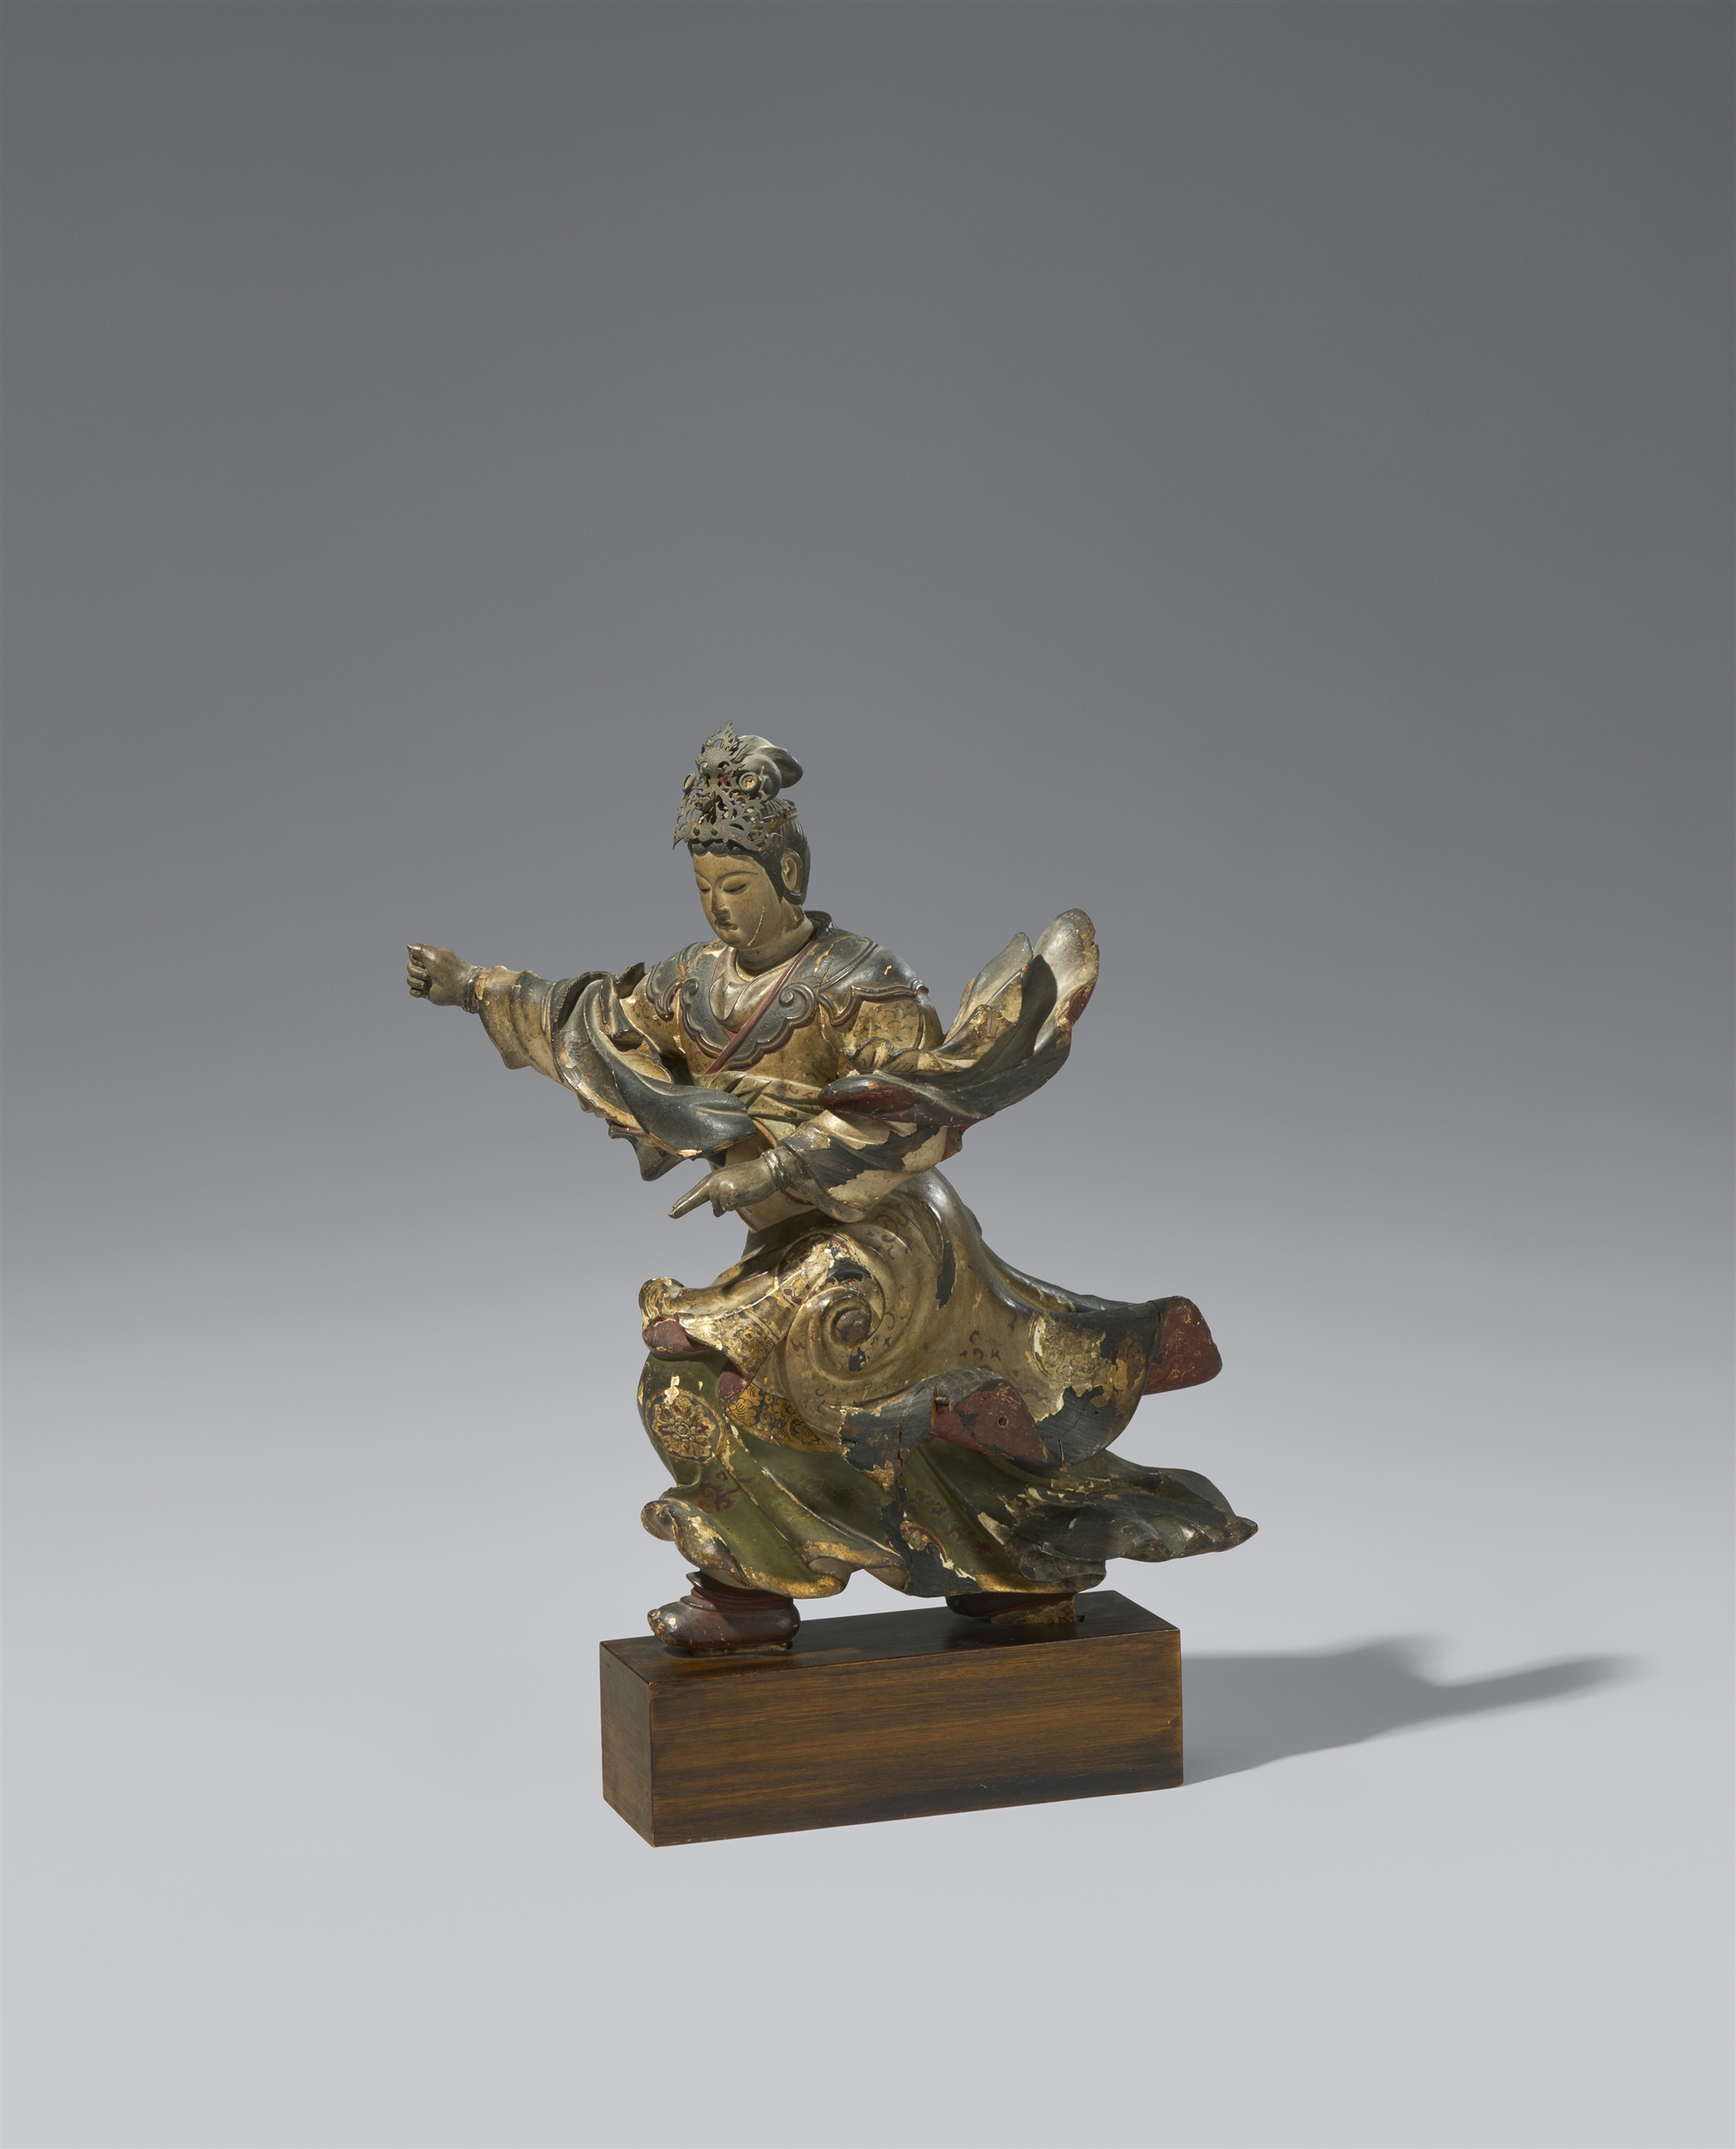 A polychromed wood Buddhist figure. Late 17thth/18th century